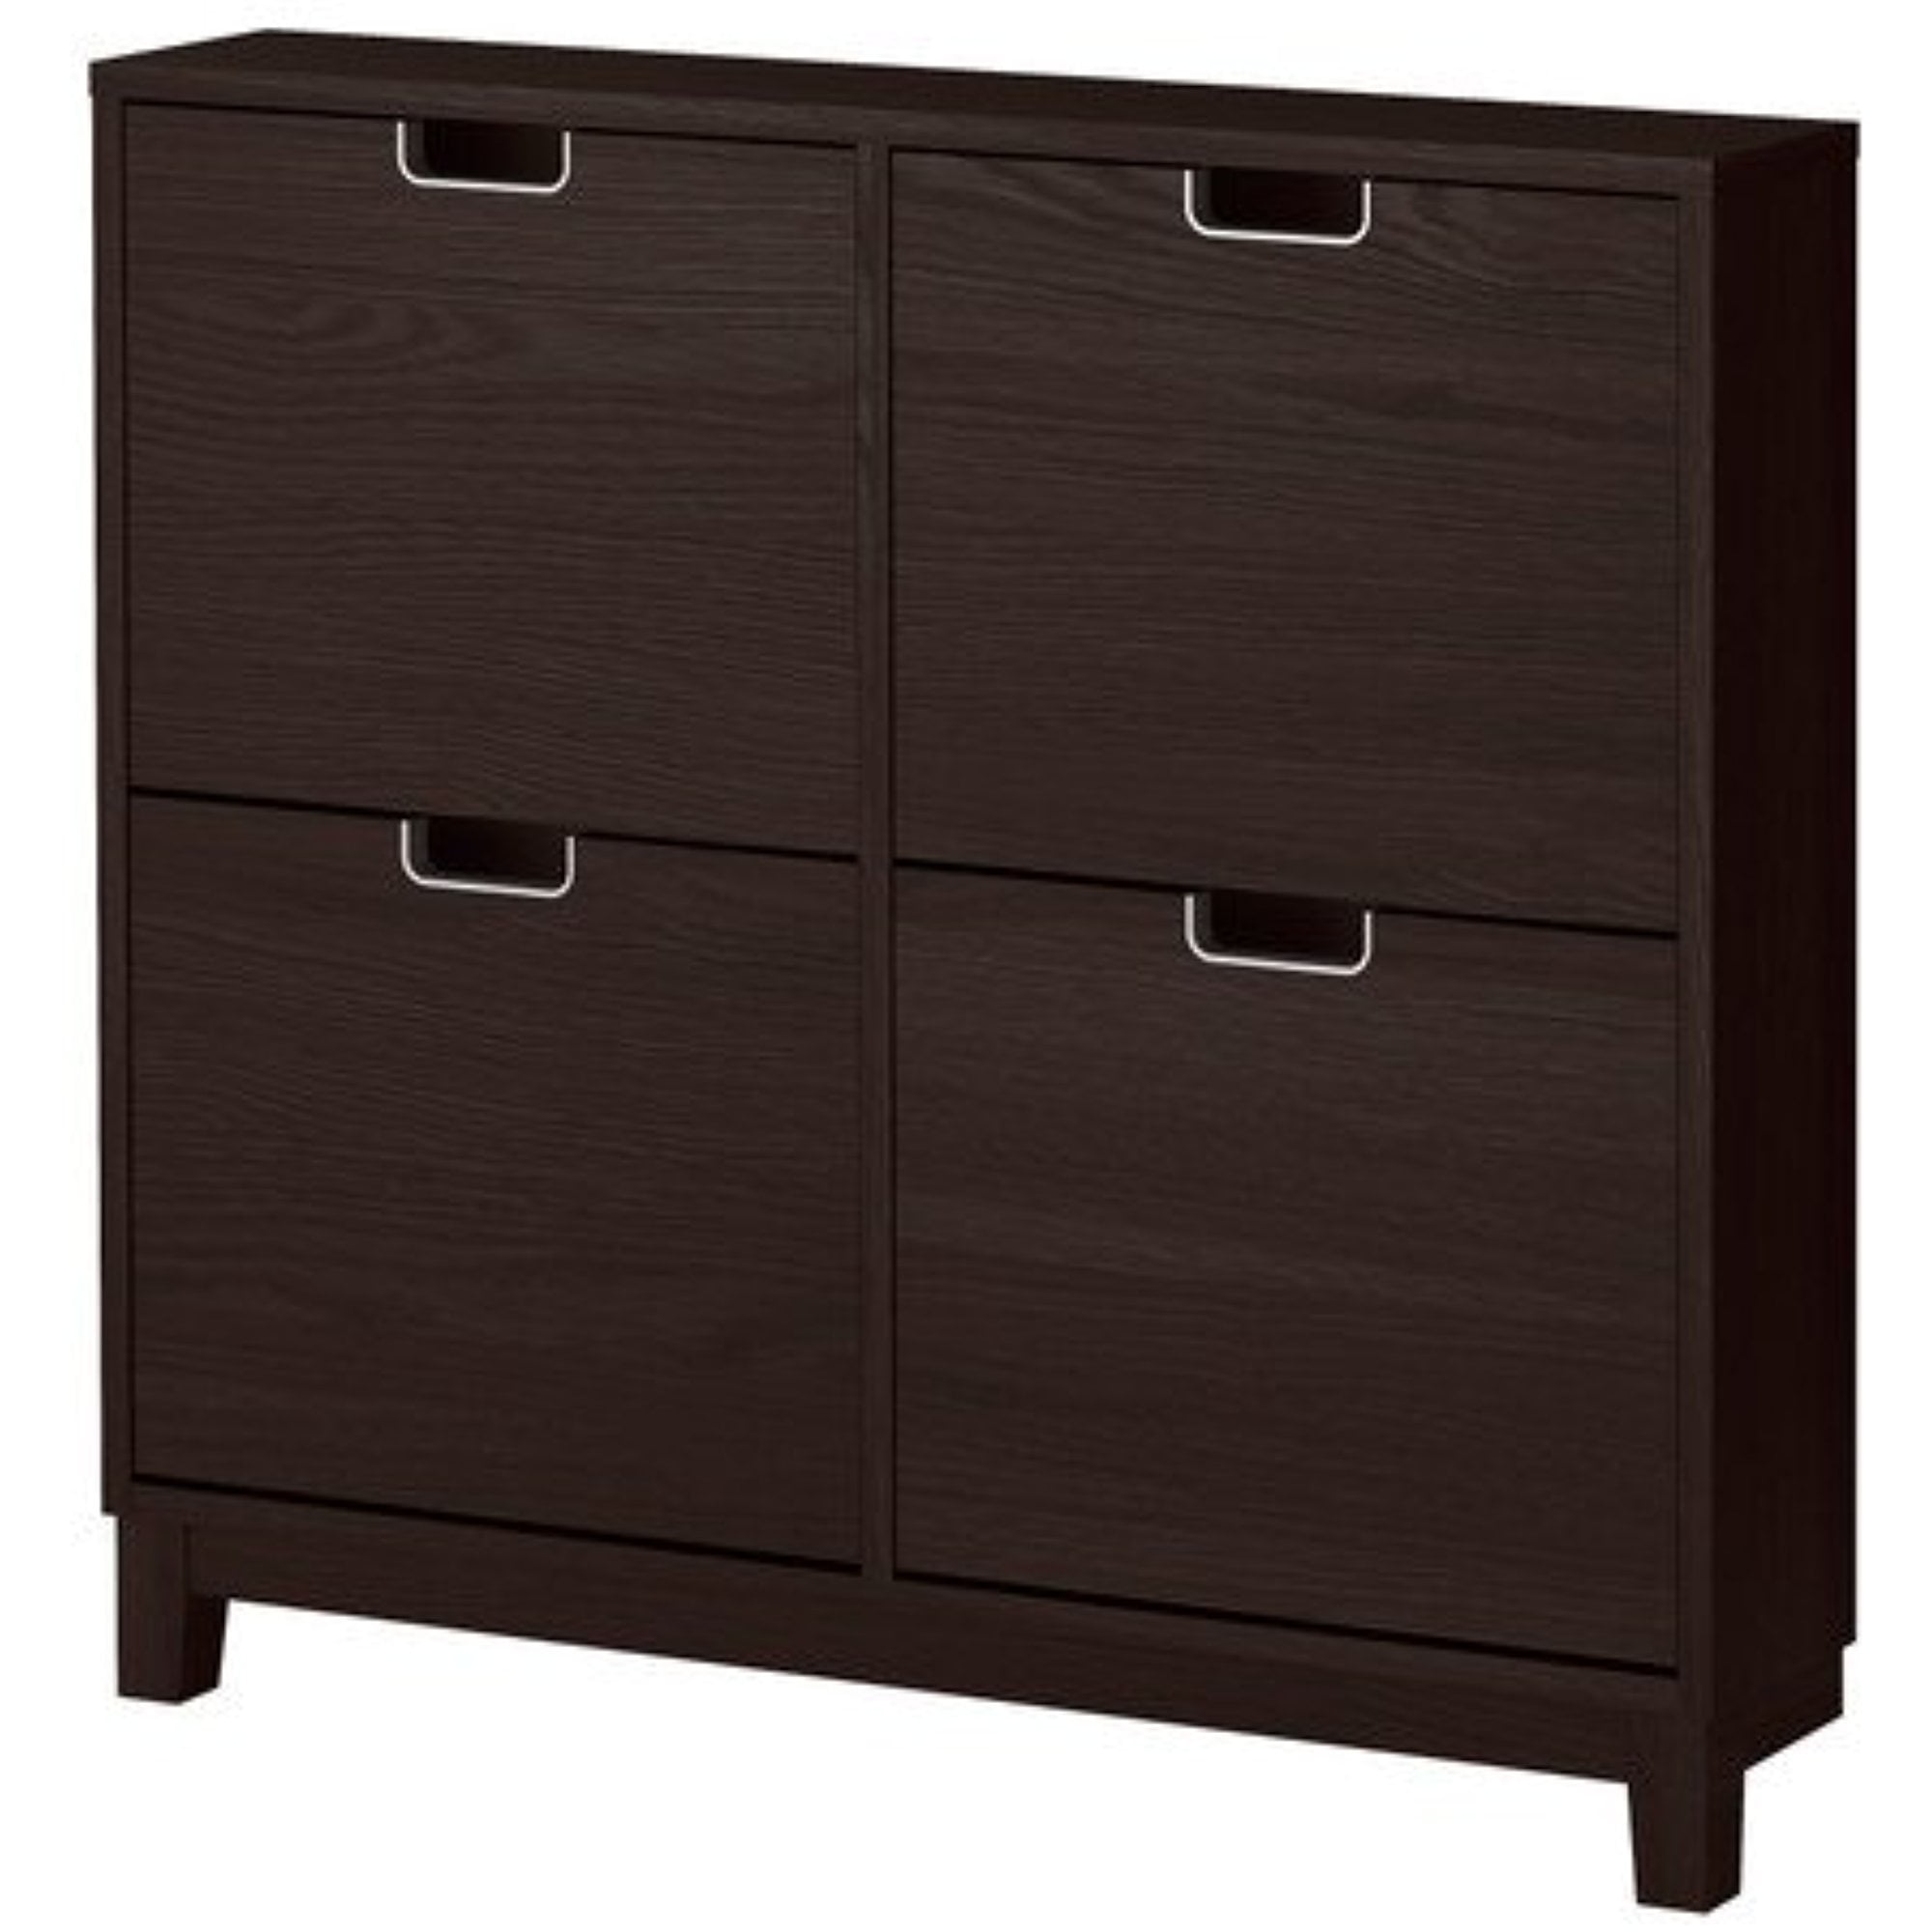  Ikea Stall Shoe Cabinet  With 4 Compartments Black Brown 